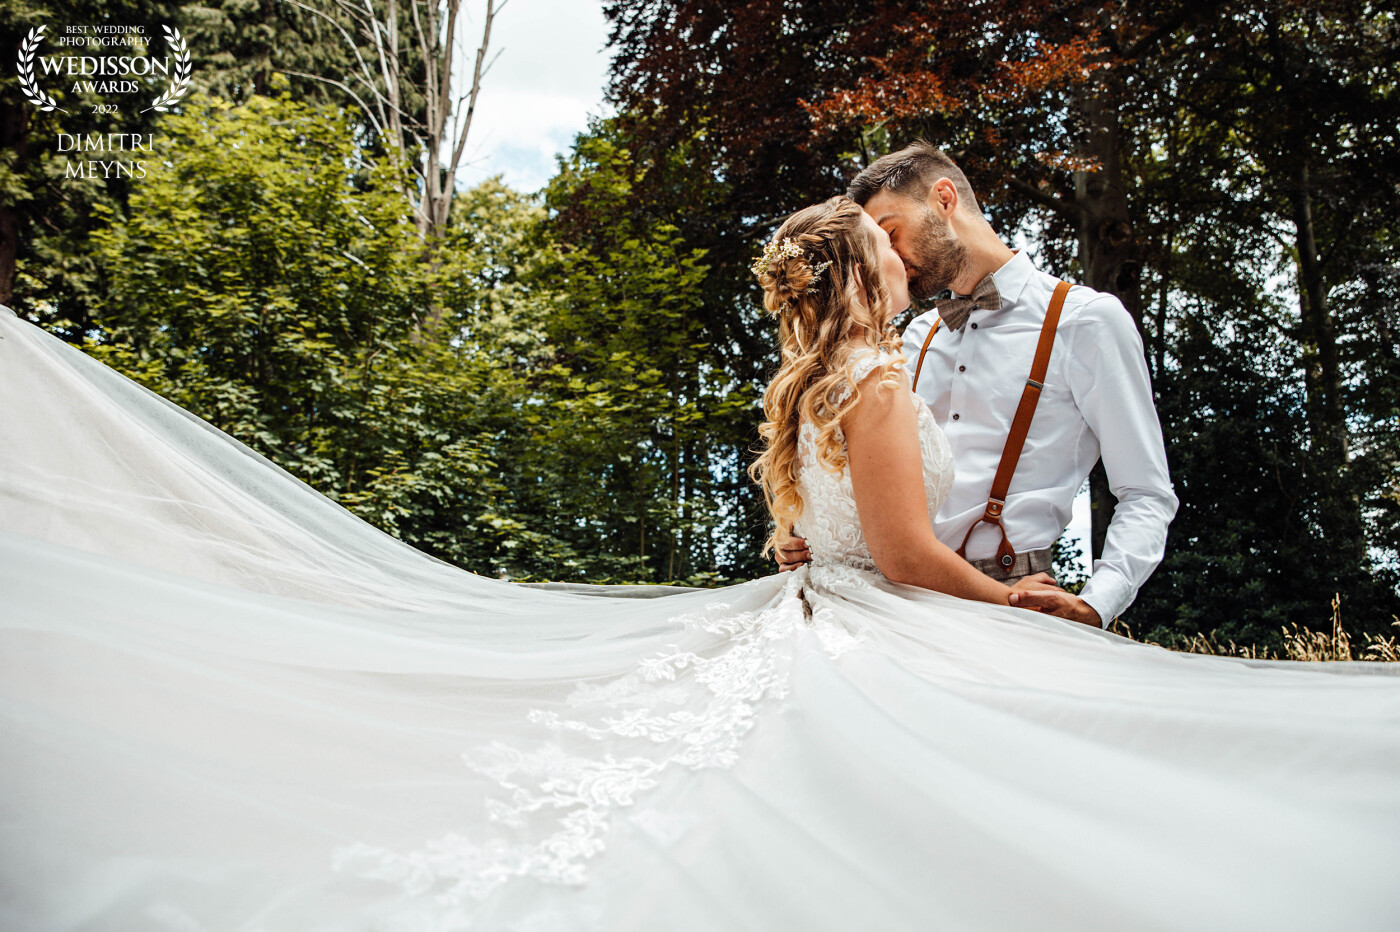 Sara and Jonas...their marriage was like a fairy tale. Everything went according to plan. A beautiful sunny day, a very nice location for the photo shoot, a very nice ceremony and a wonderful party to finish! With now two awards, their story is complete!